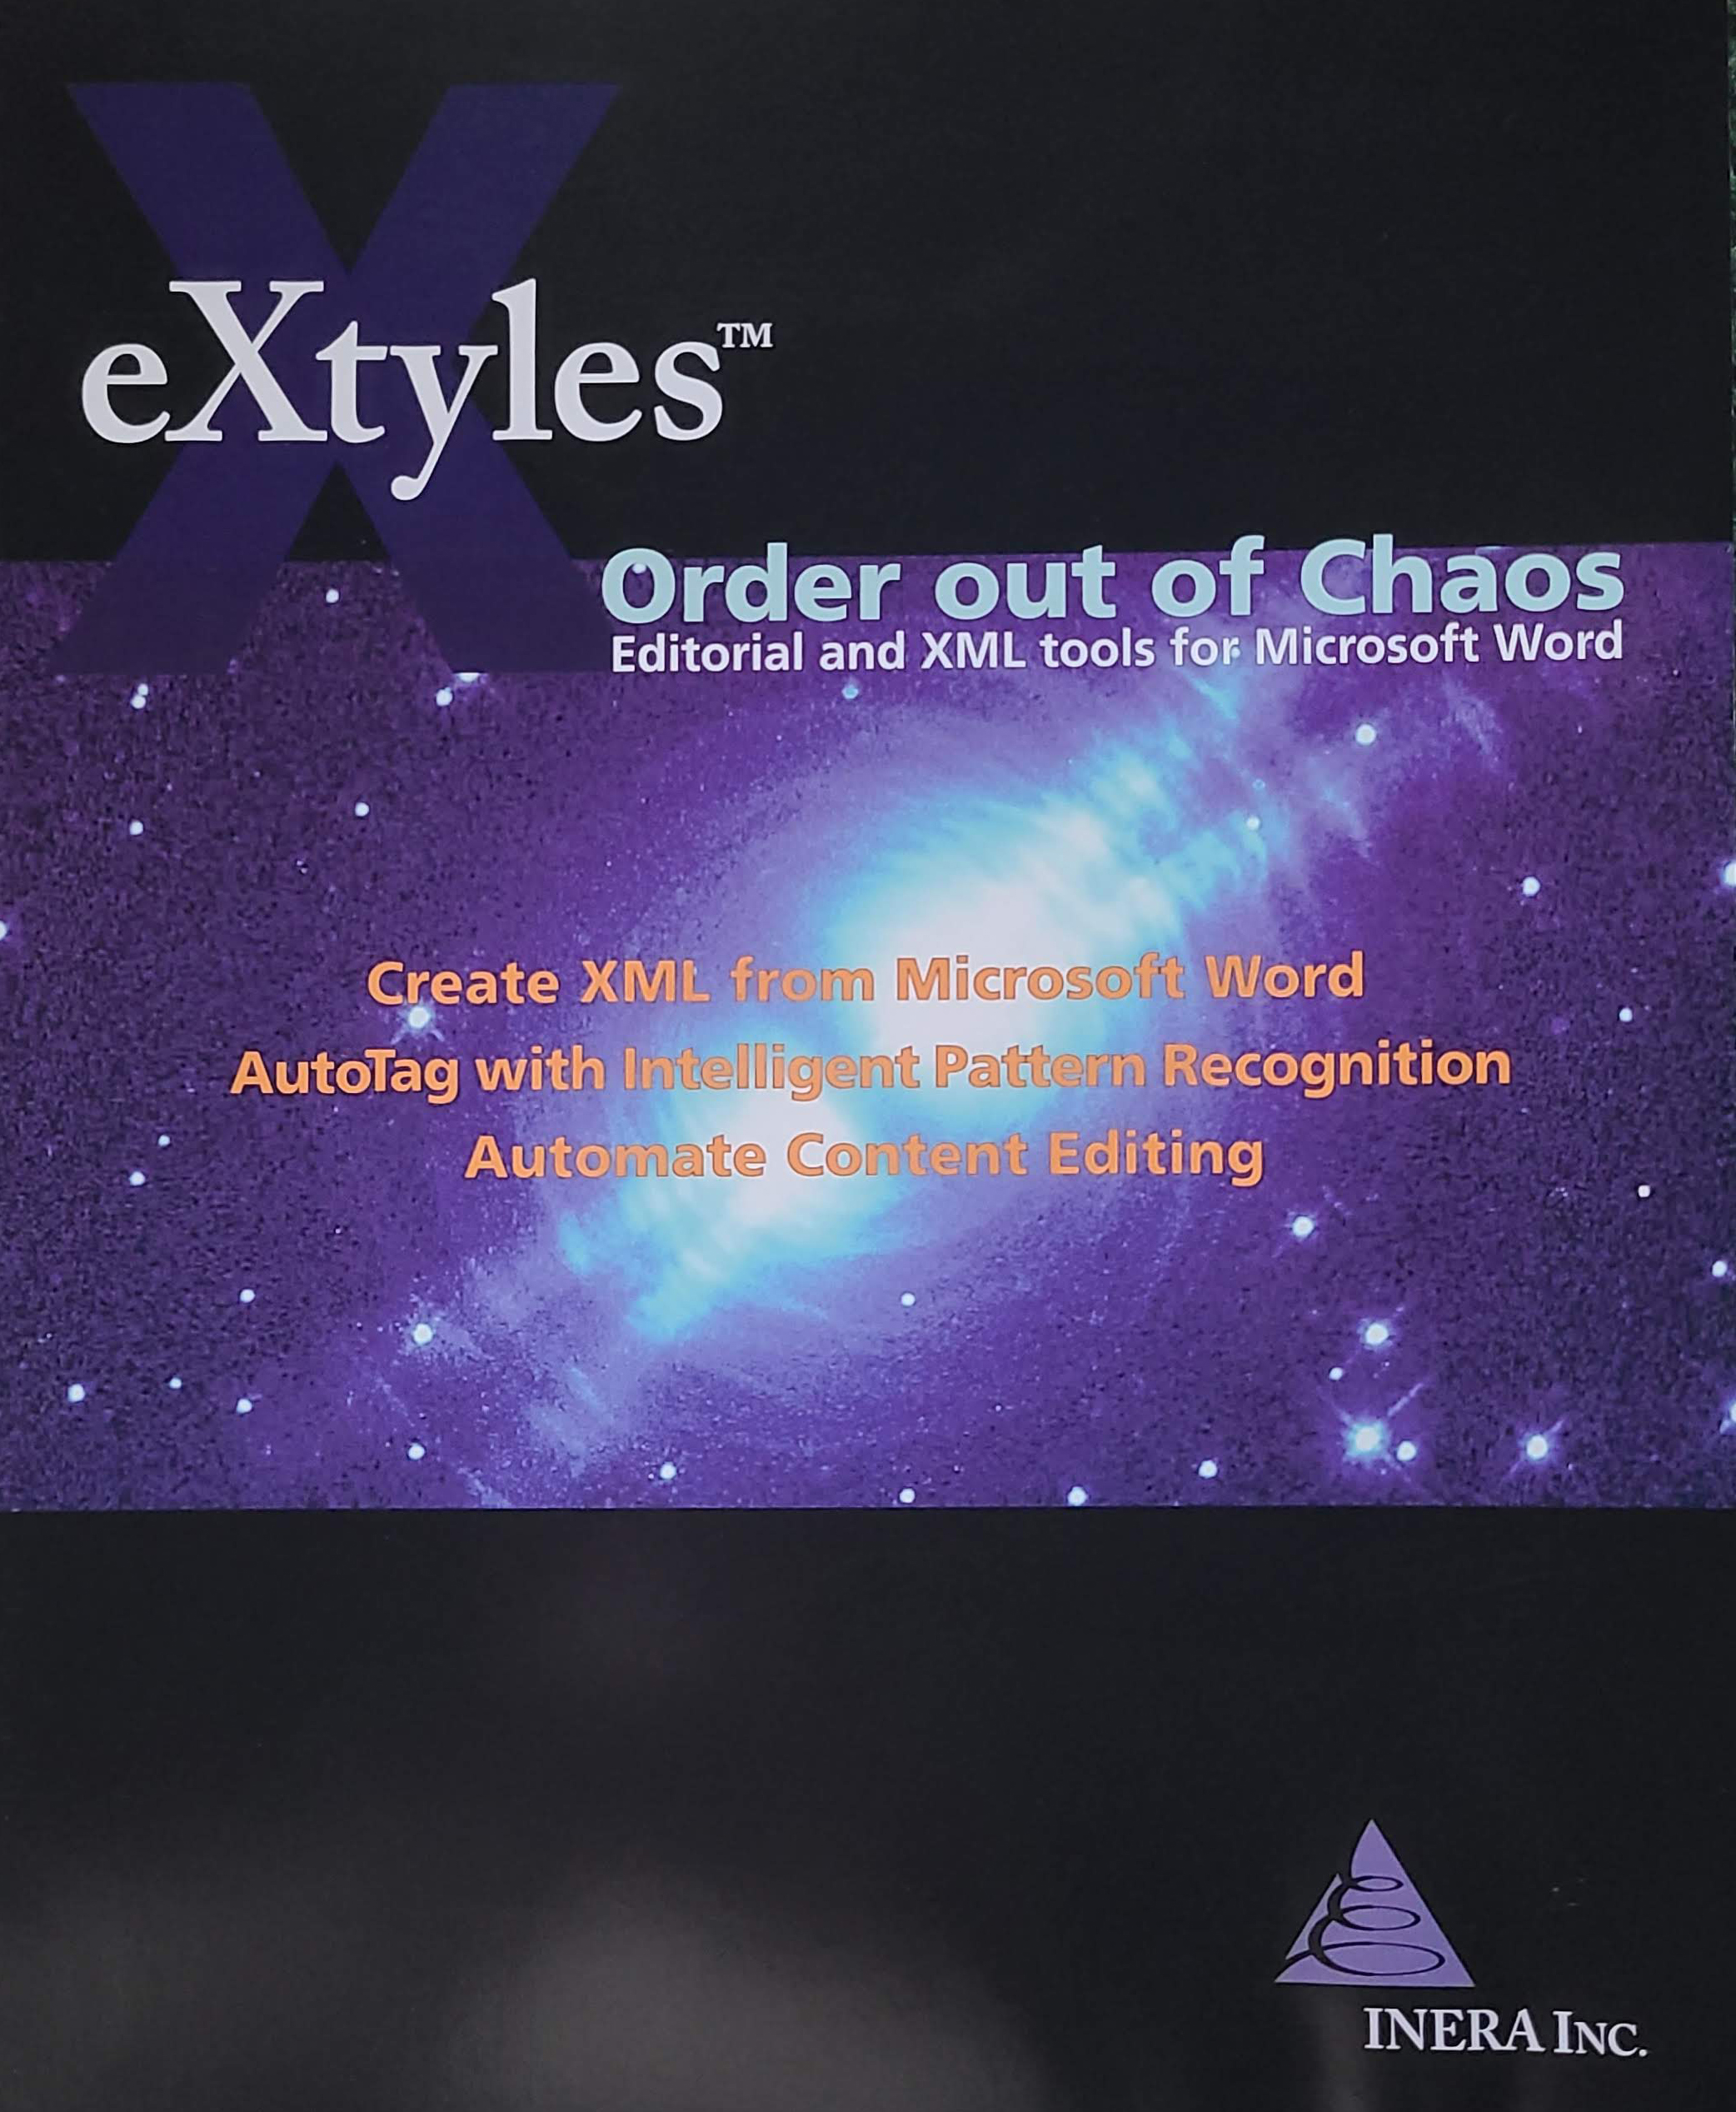 An early eXtyles marketing flyer. The words Order out of Chaos and Create XML from Microsoft Word / AutoTag with Intelligent Pattern Recognition / Automate Content Editing are superimposed on an image of a proto-planetary nebula.